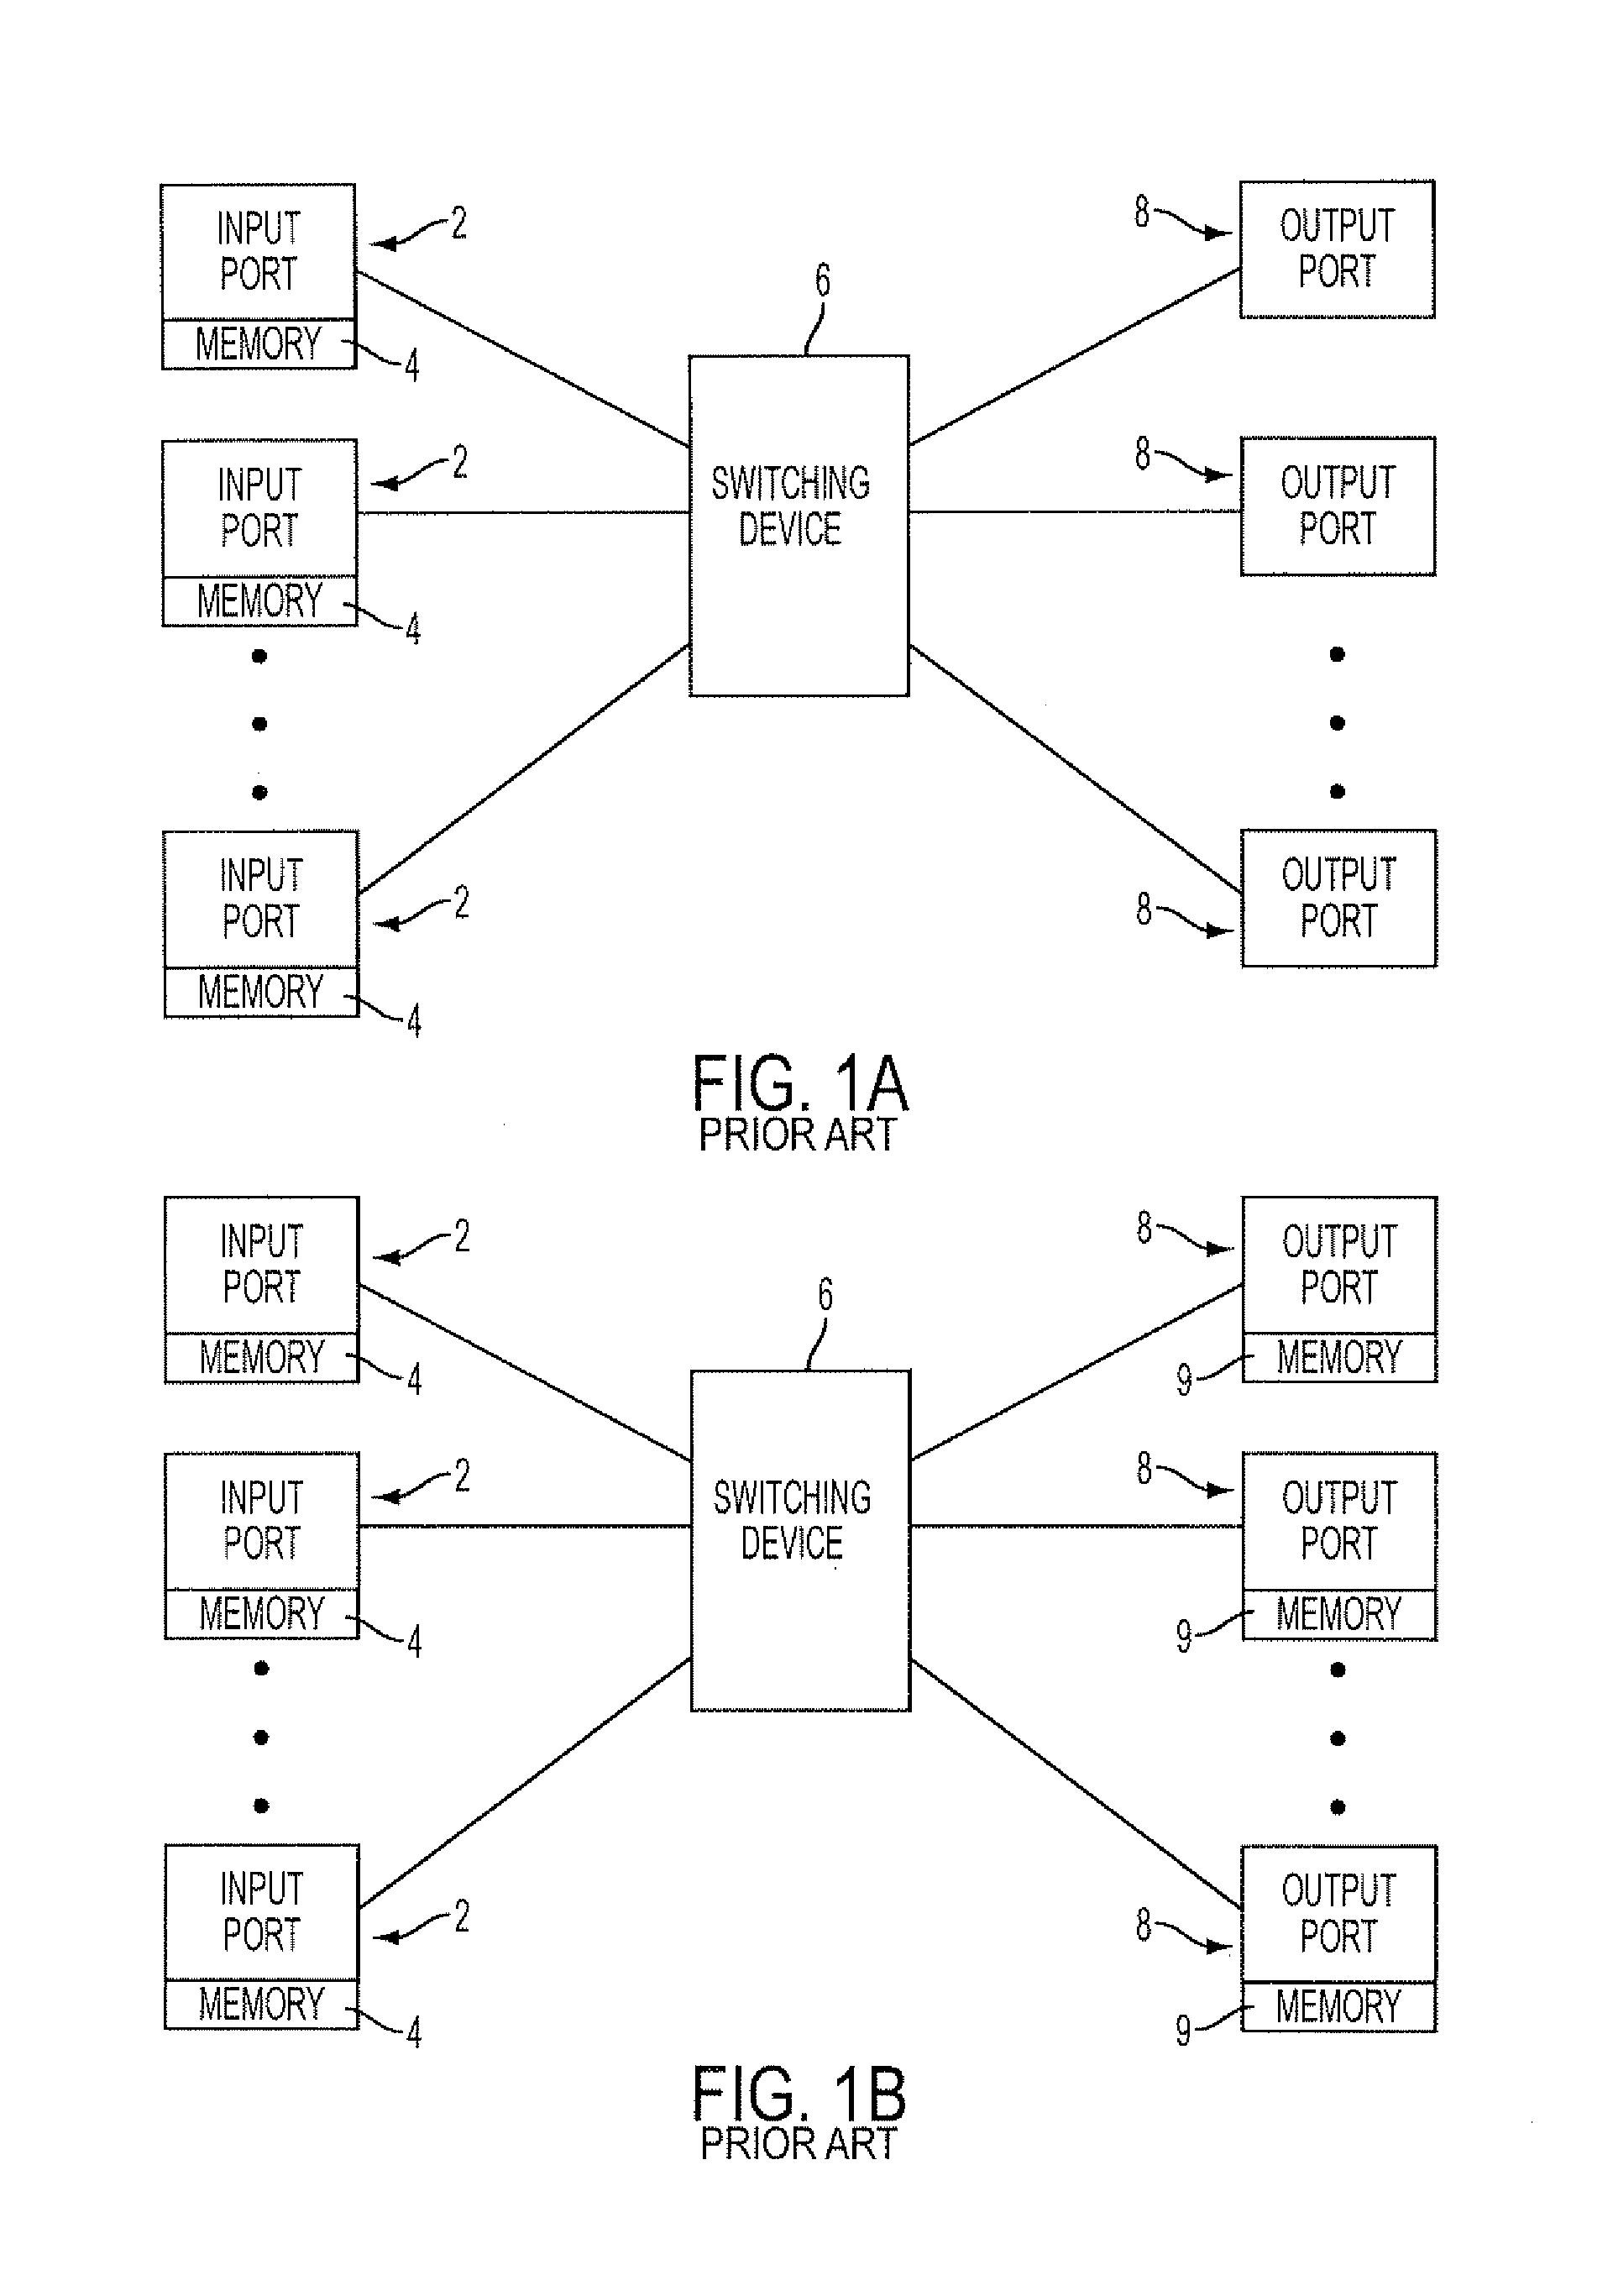 Systems and methods for processing packets